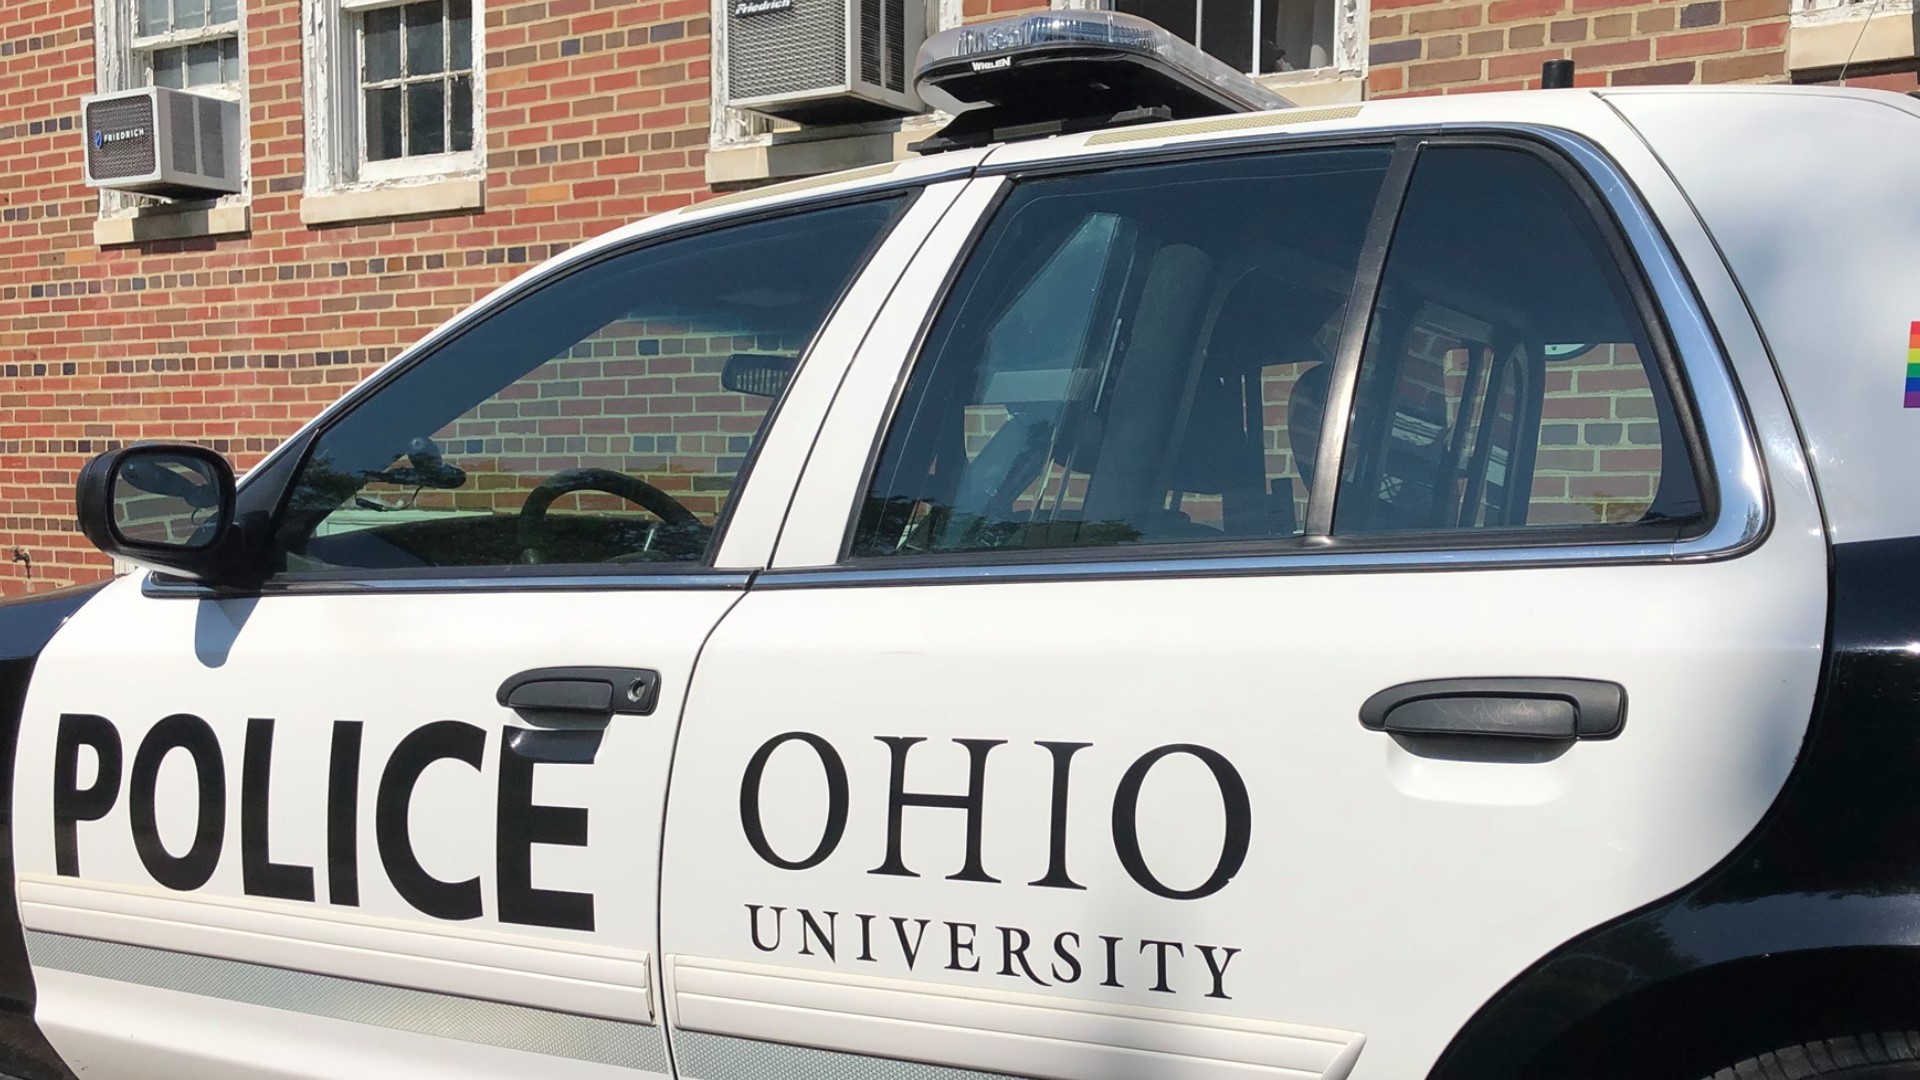 Two students reported separate sexual assaults, including rape, at Ohio University over the weekend.